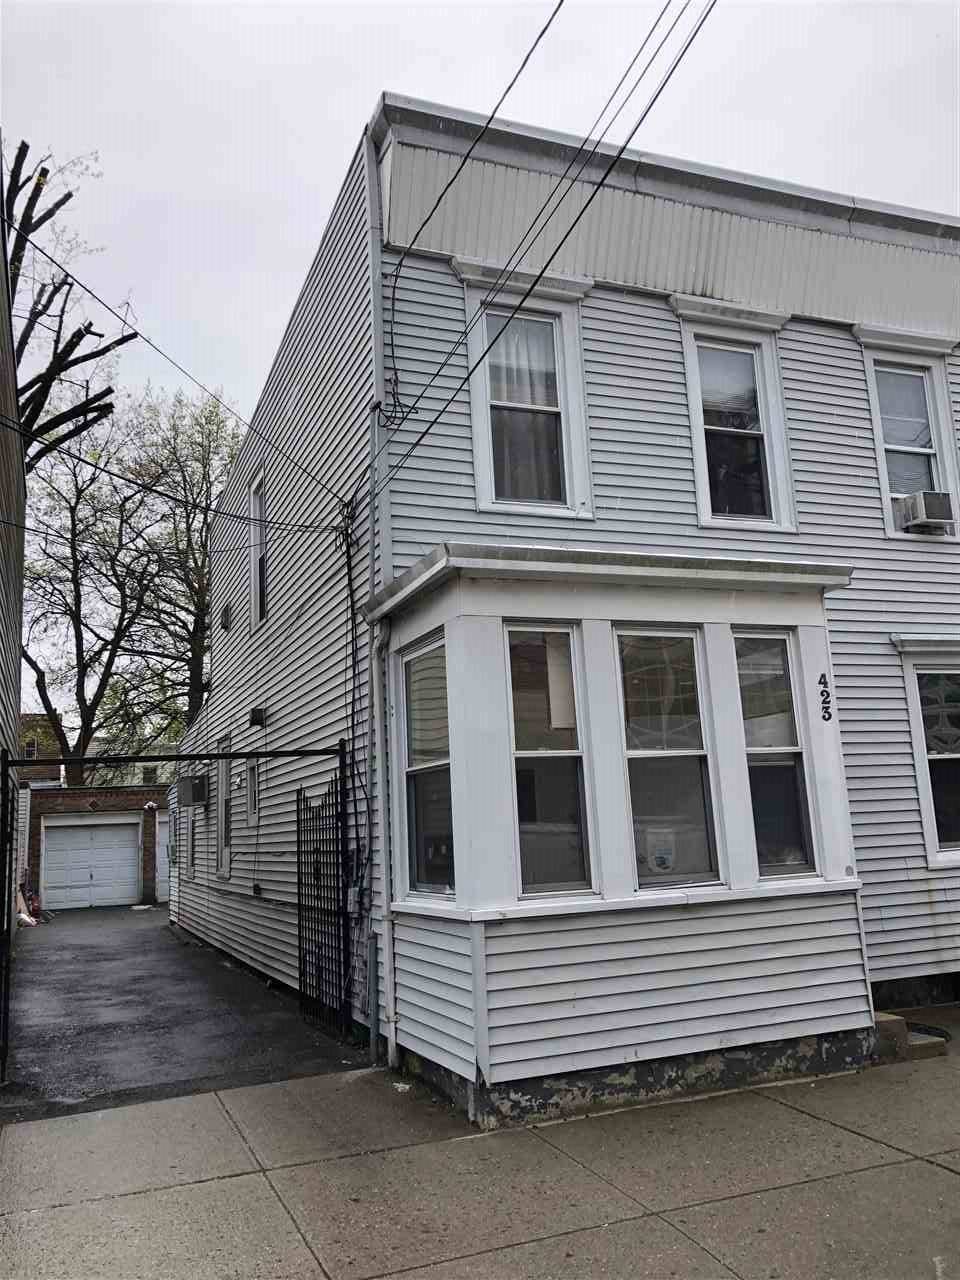 423 68TH ST Multi-Family New Jersey